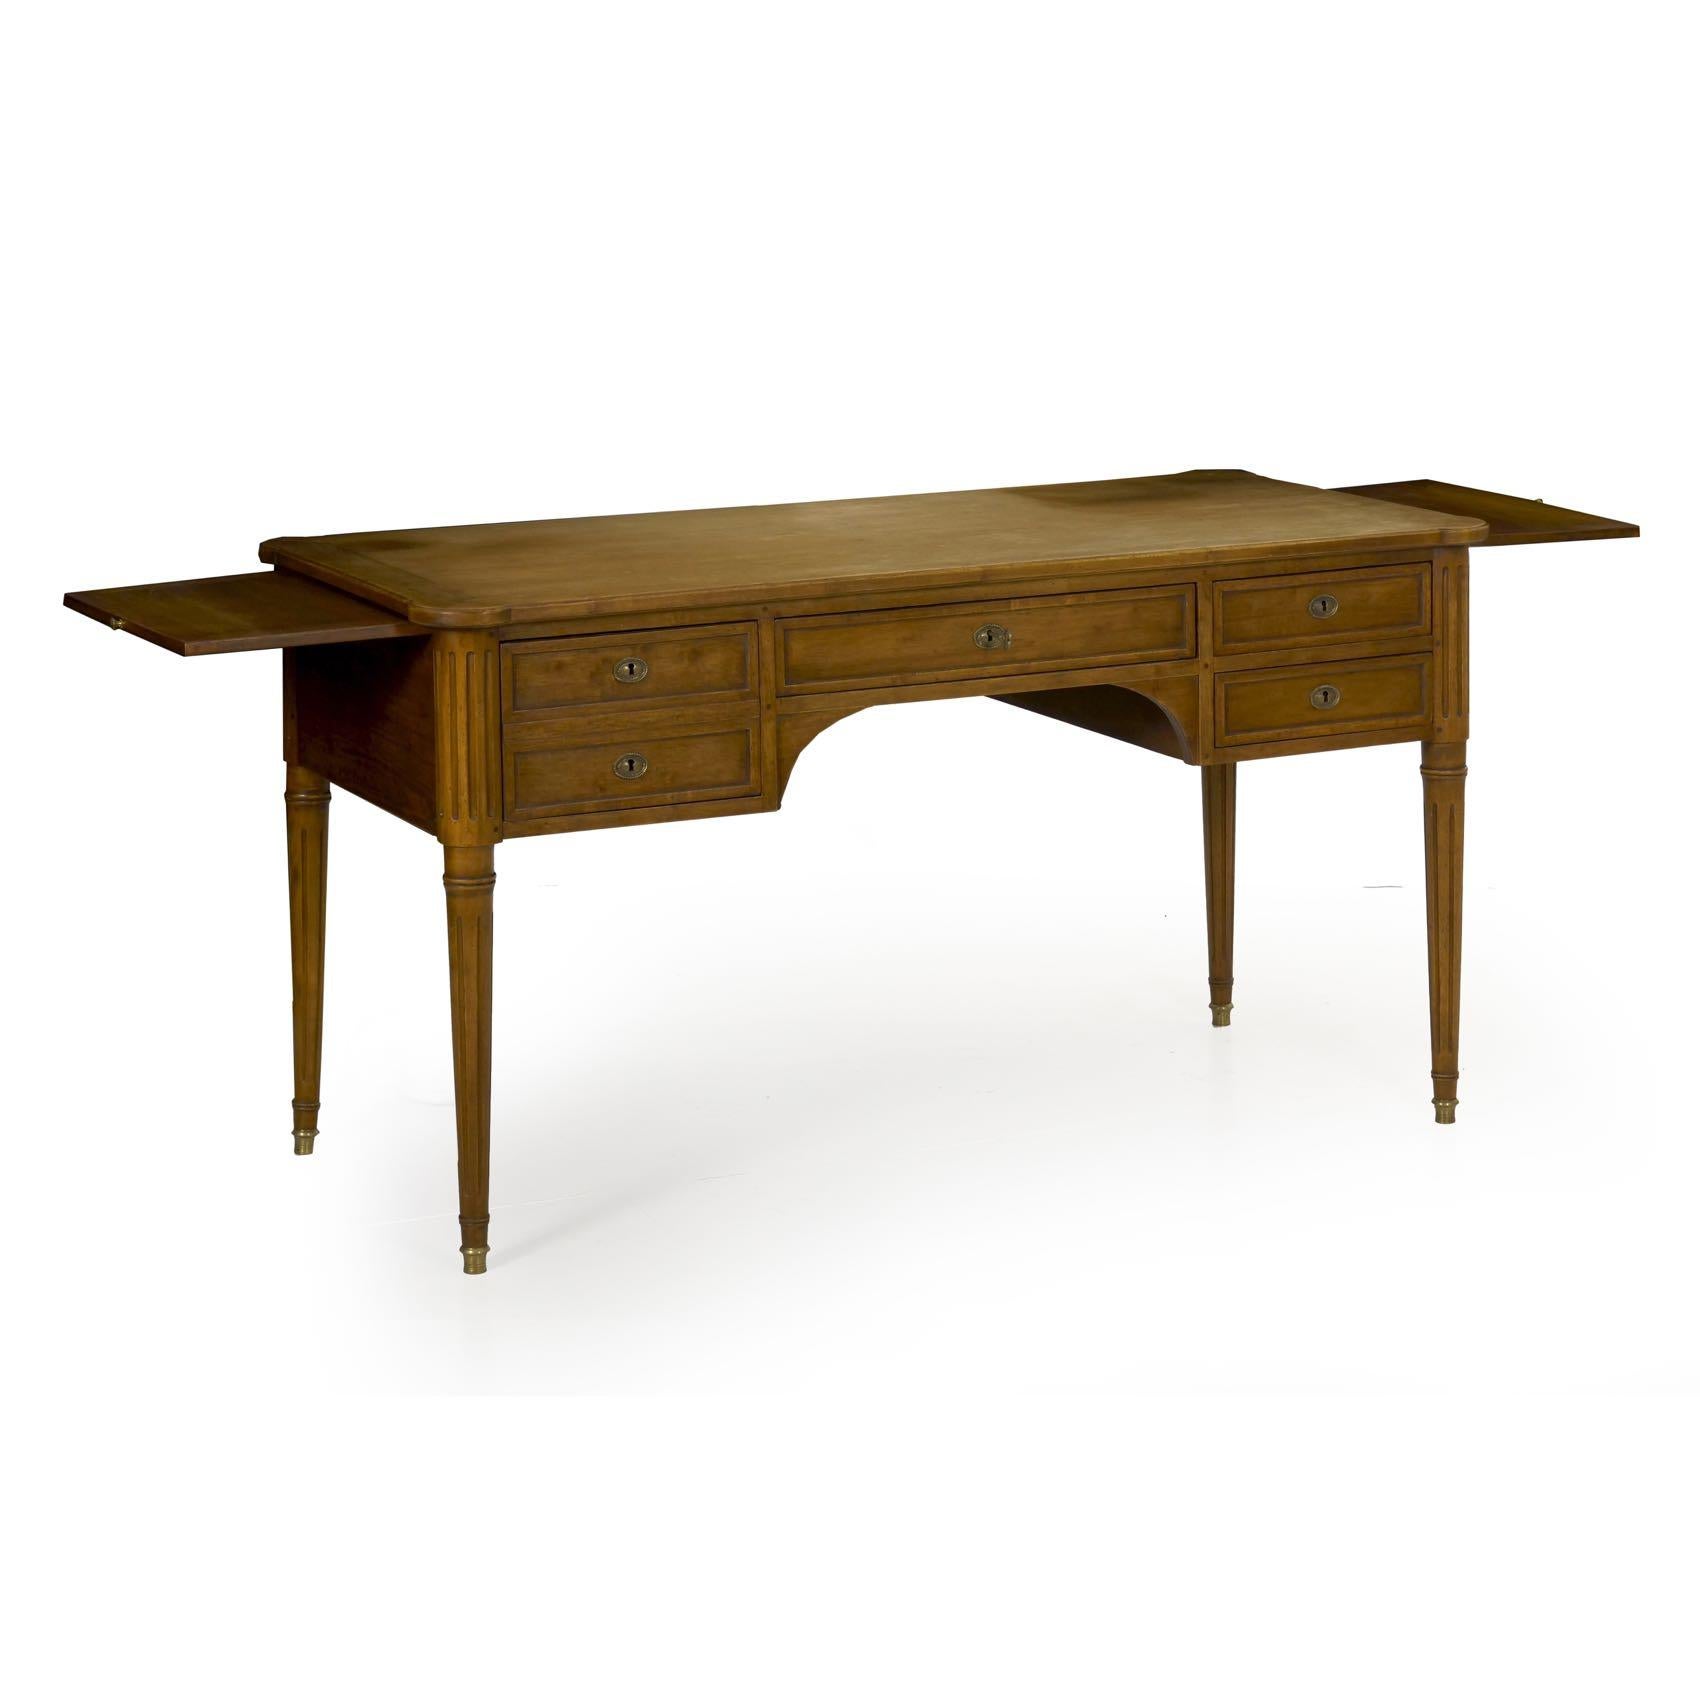 This attractive bureau plat is crafted in the Louis XVI taste during the middle of the 20th century, executed in solid fruitwood. It is true to the original forms with tenon-mortised joints locked together with twin pegs. Built to last the test of